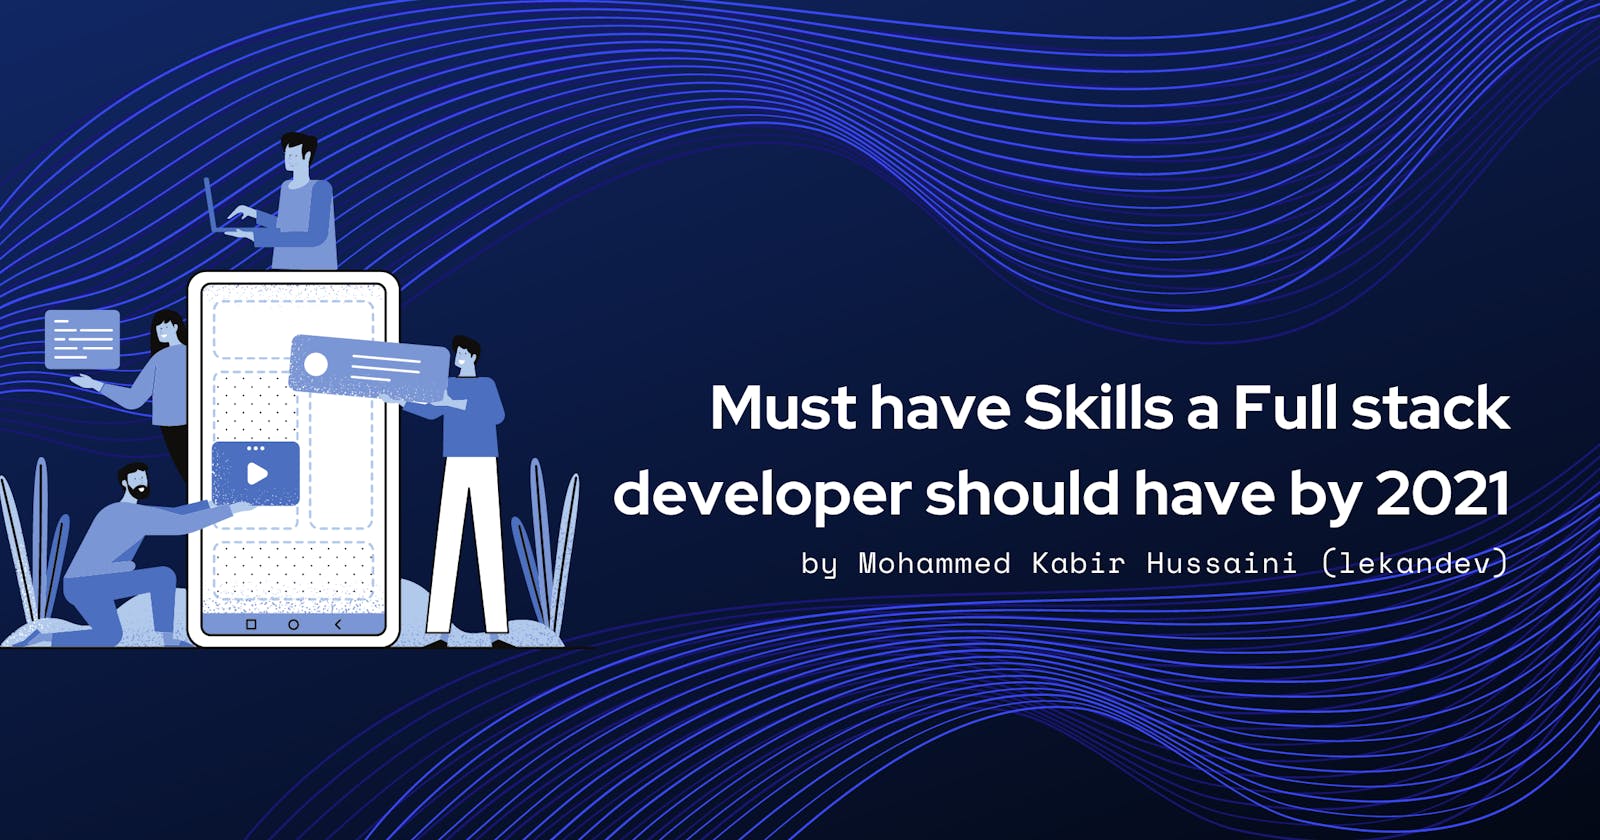 Must have Skills a Full stack developer should have by 2021